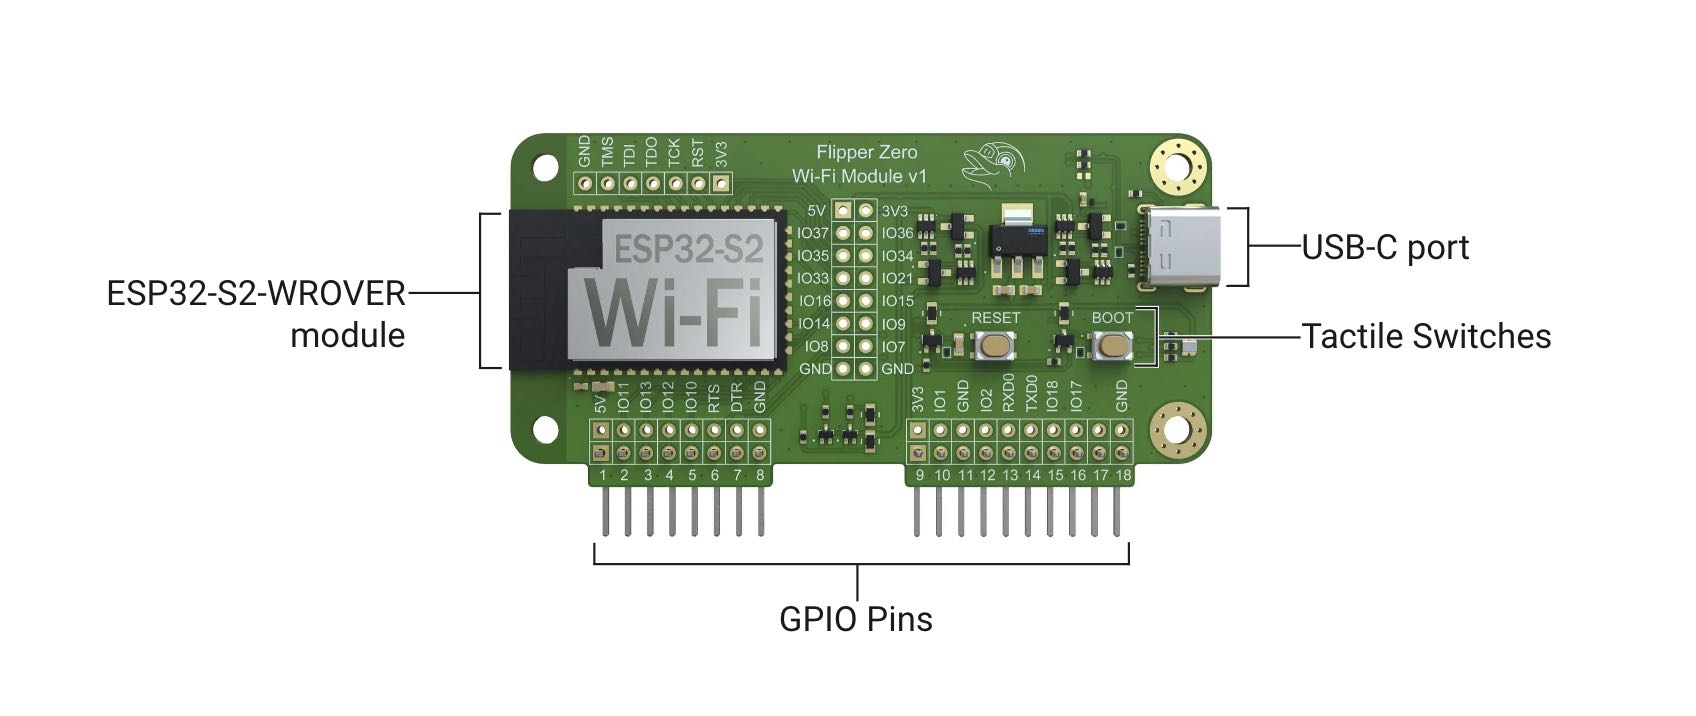 End Game Flipper Zero Wifi GPIO Module from ruckus // section80 on